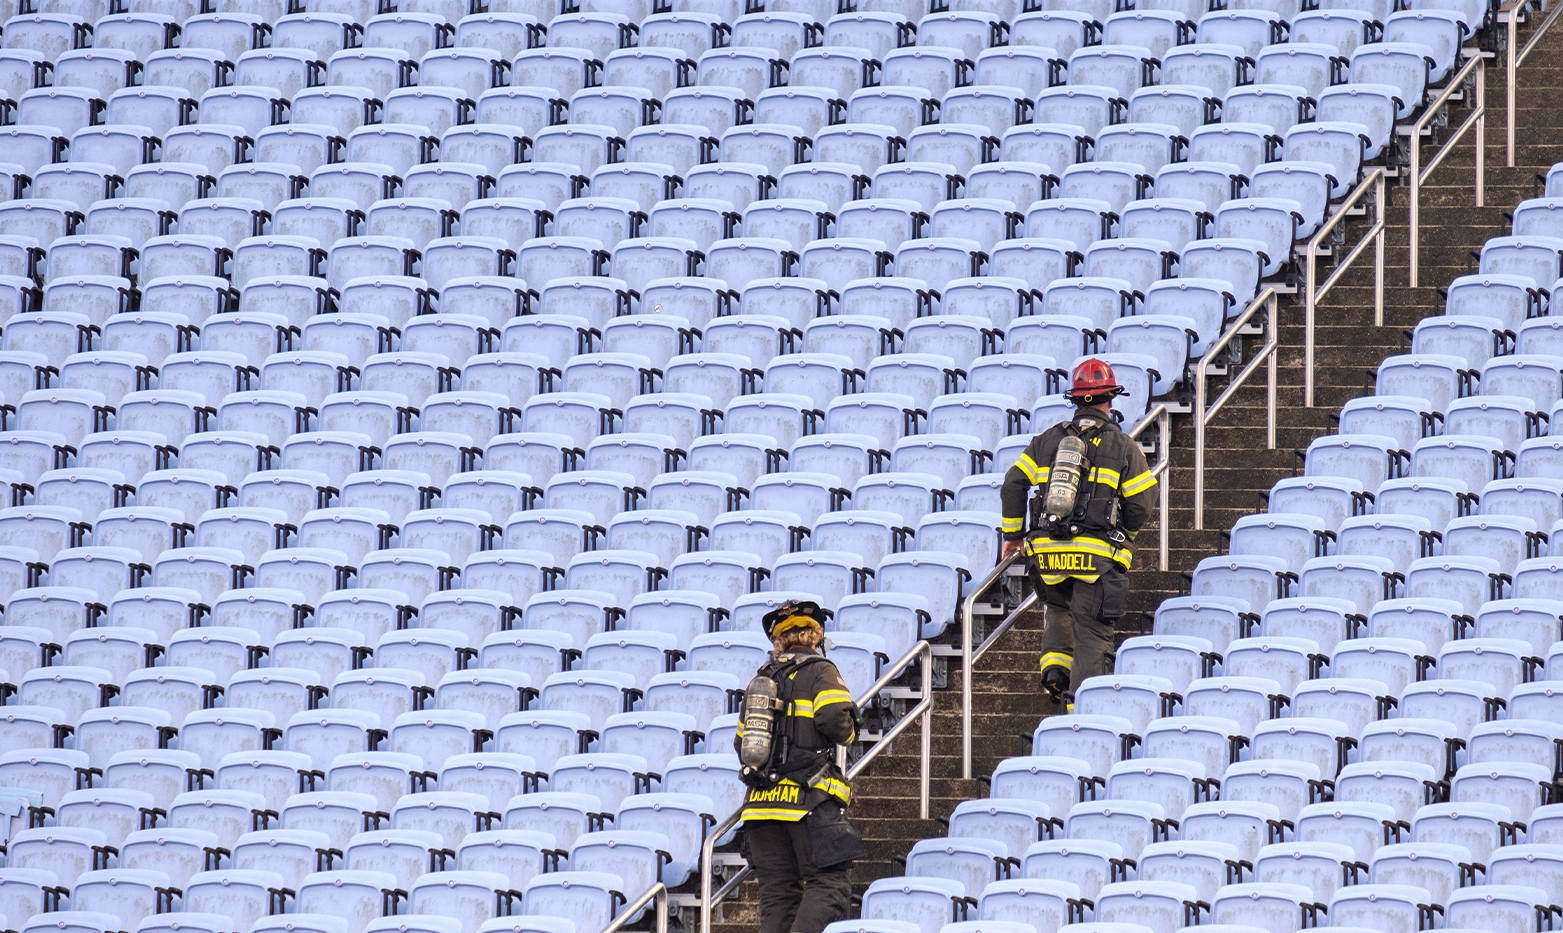 Two firefighters running up stadium stairs.